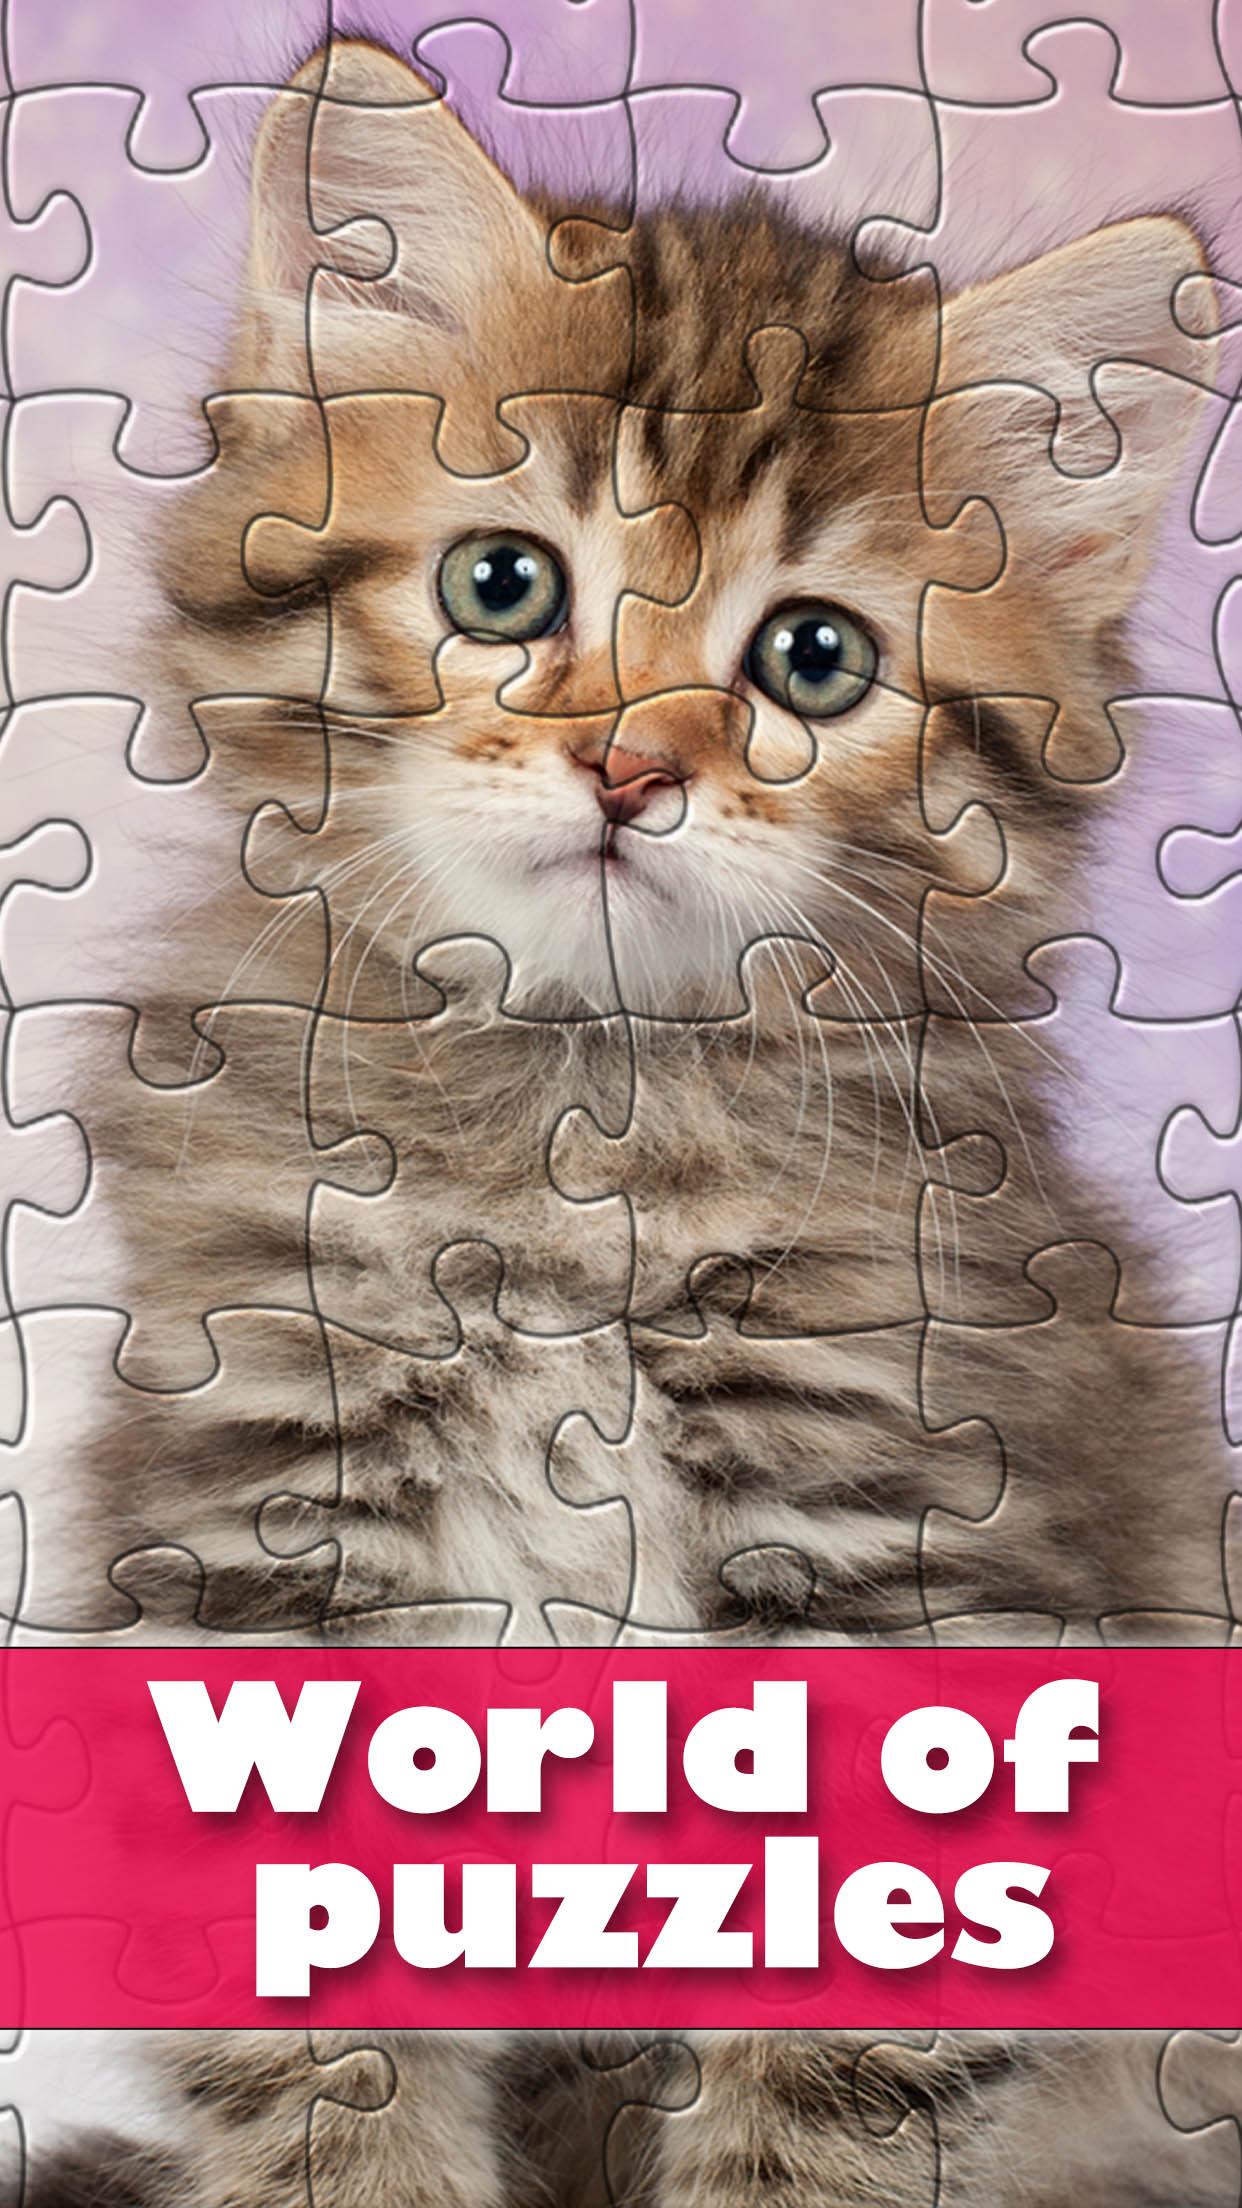 World of Puzzles - best free jigsaw puzzle games 1.16 Screenshot 1